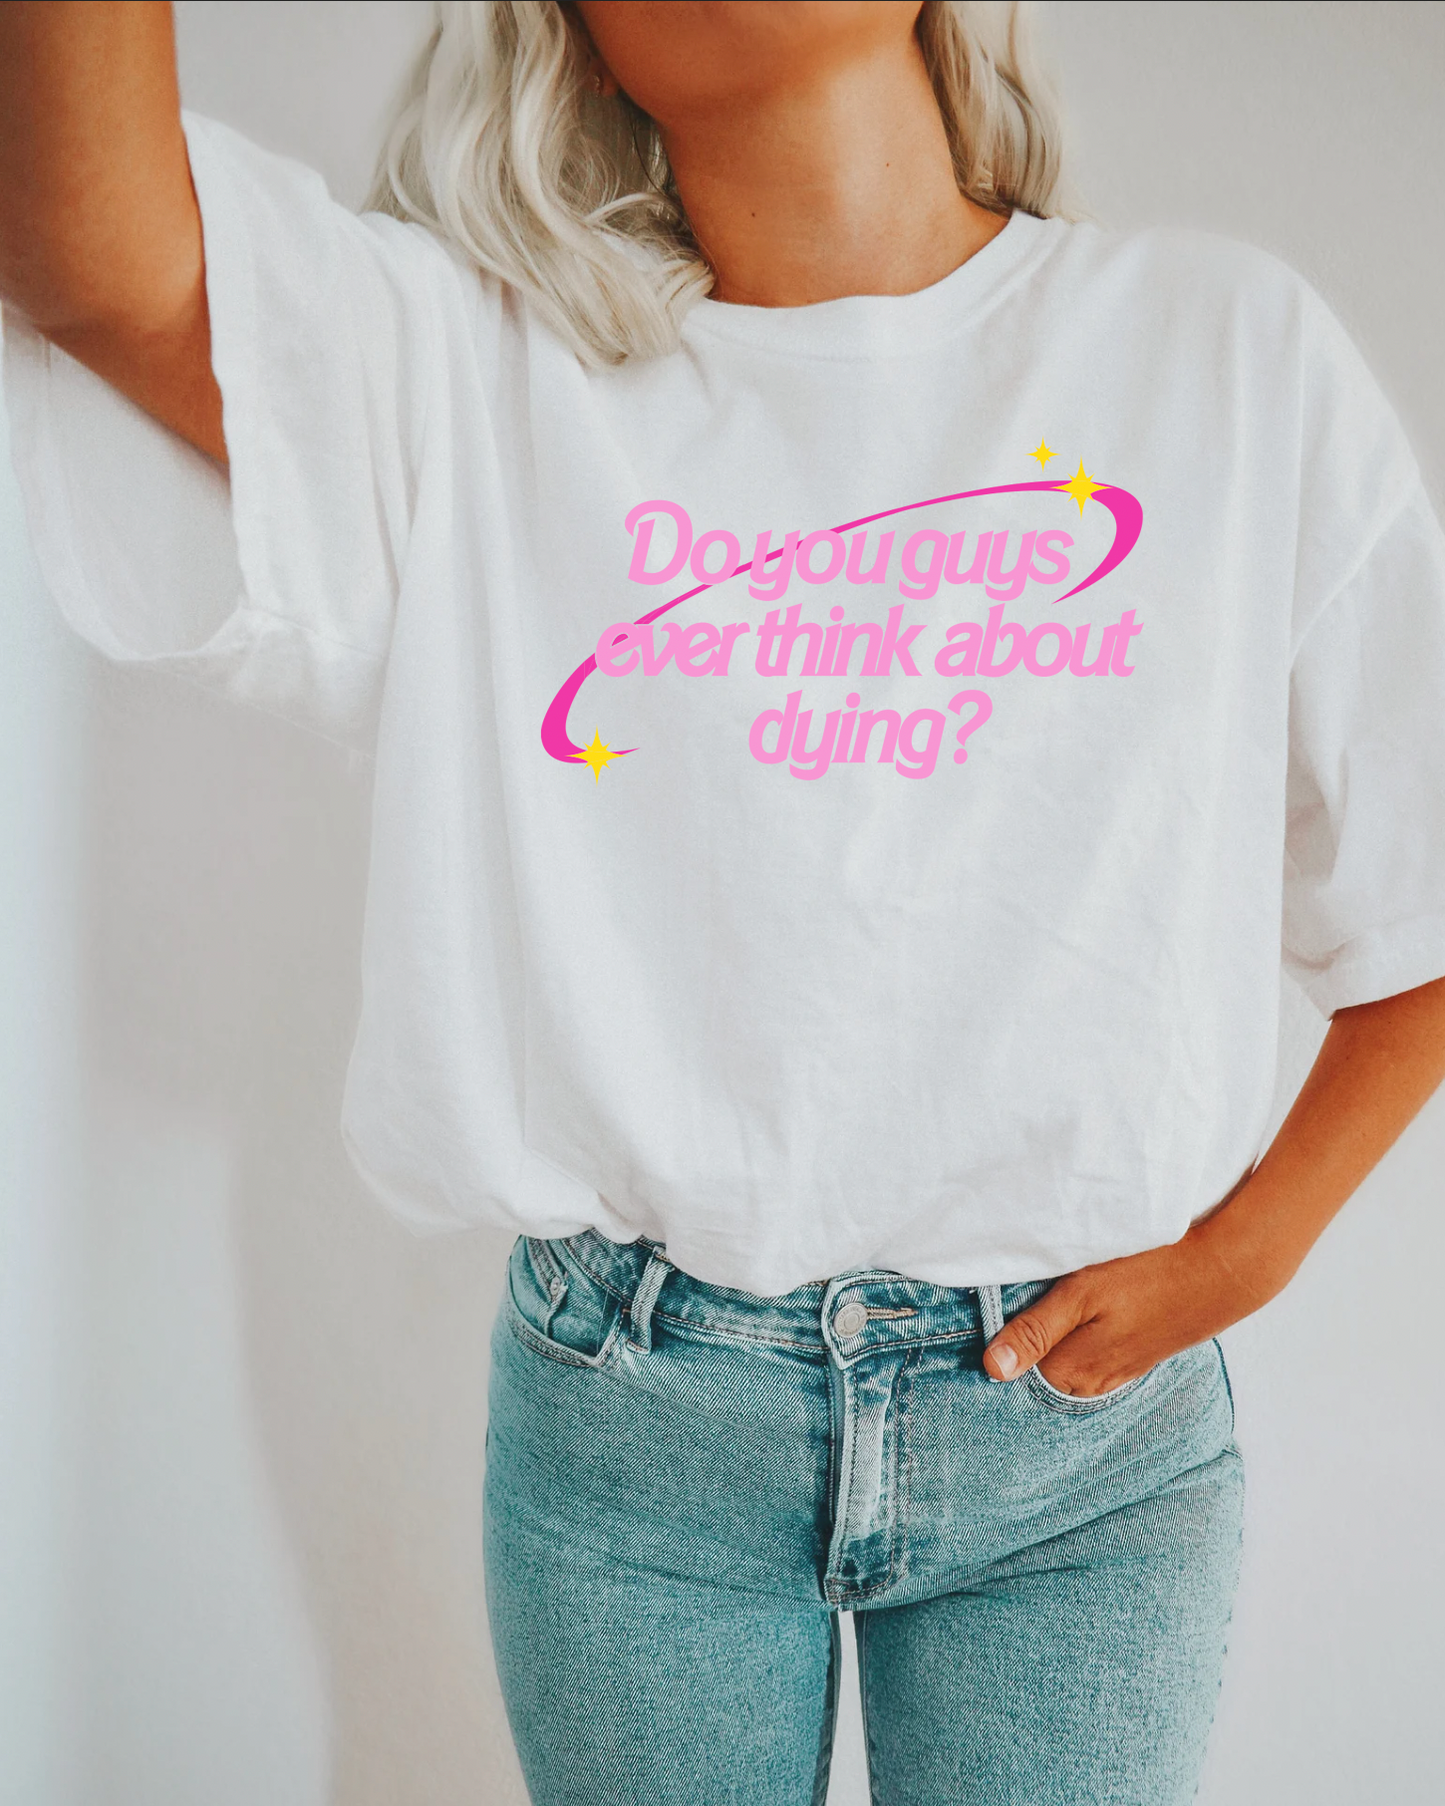 Do You Guys Ever Think About Dying? Barbie Inspired Pink Unisex T-Shirt